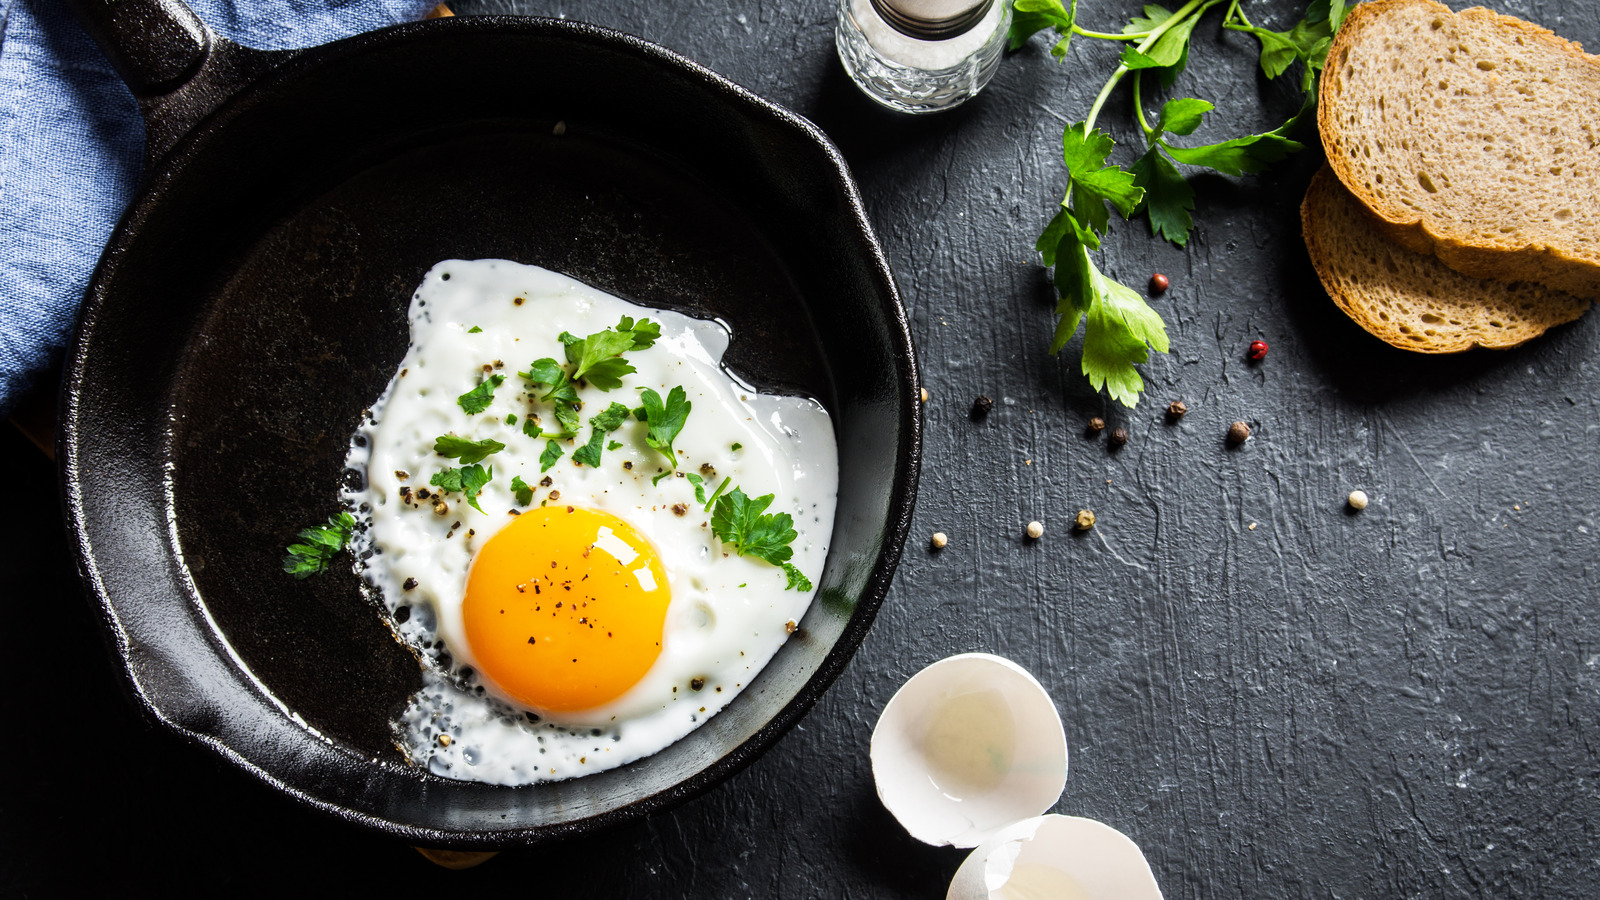 https://www.tastingtable.com/img/gallery/why-you-should-be-frying-eggs-in-olive-oil/l-intro-1659123742.jpg